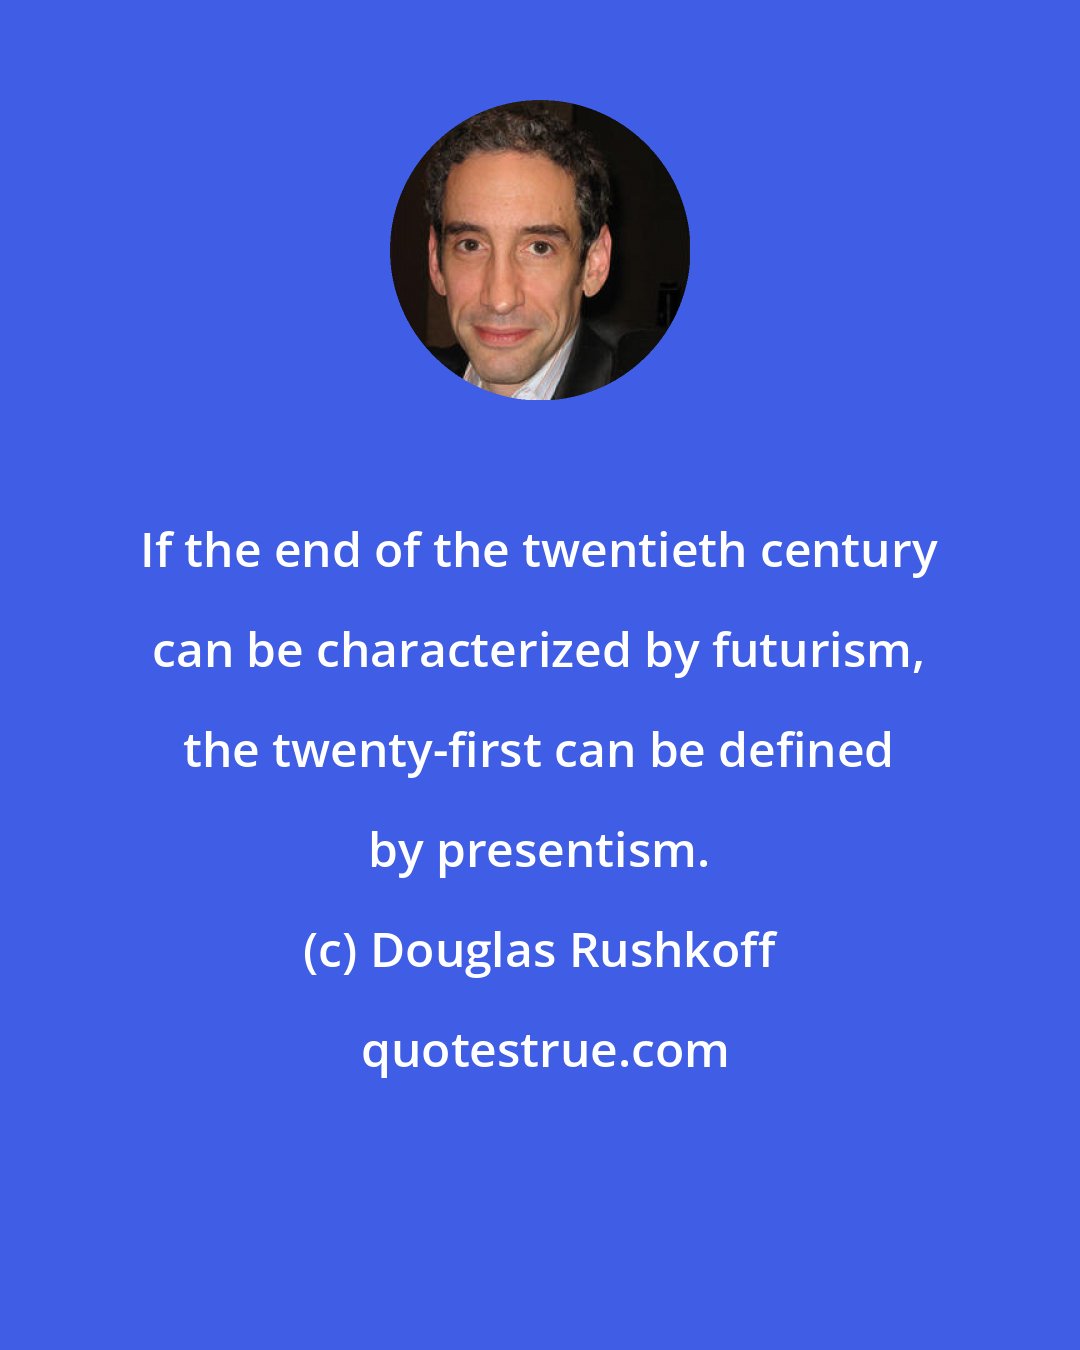 Douglas Rushkoff: If the end of the twentieth century can be characterized by futurism, the twenty-first can be defined by presentism.